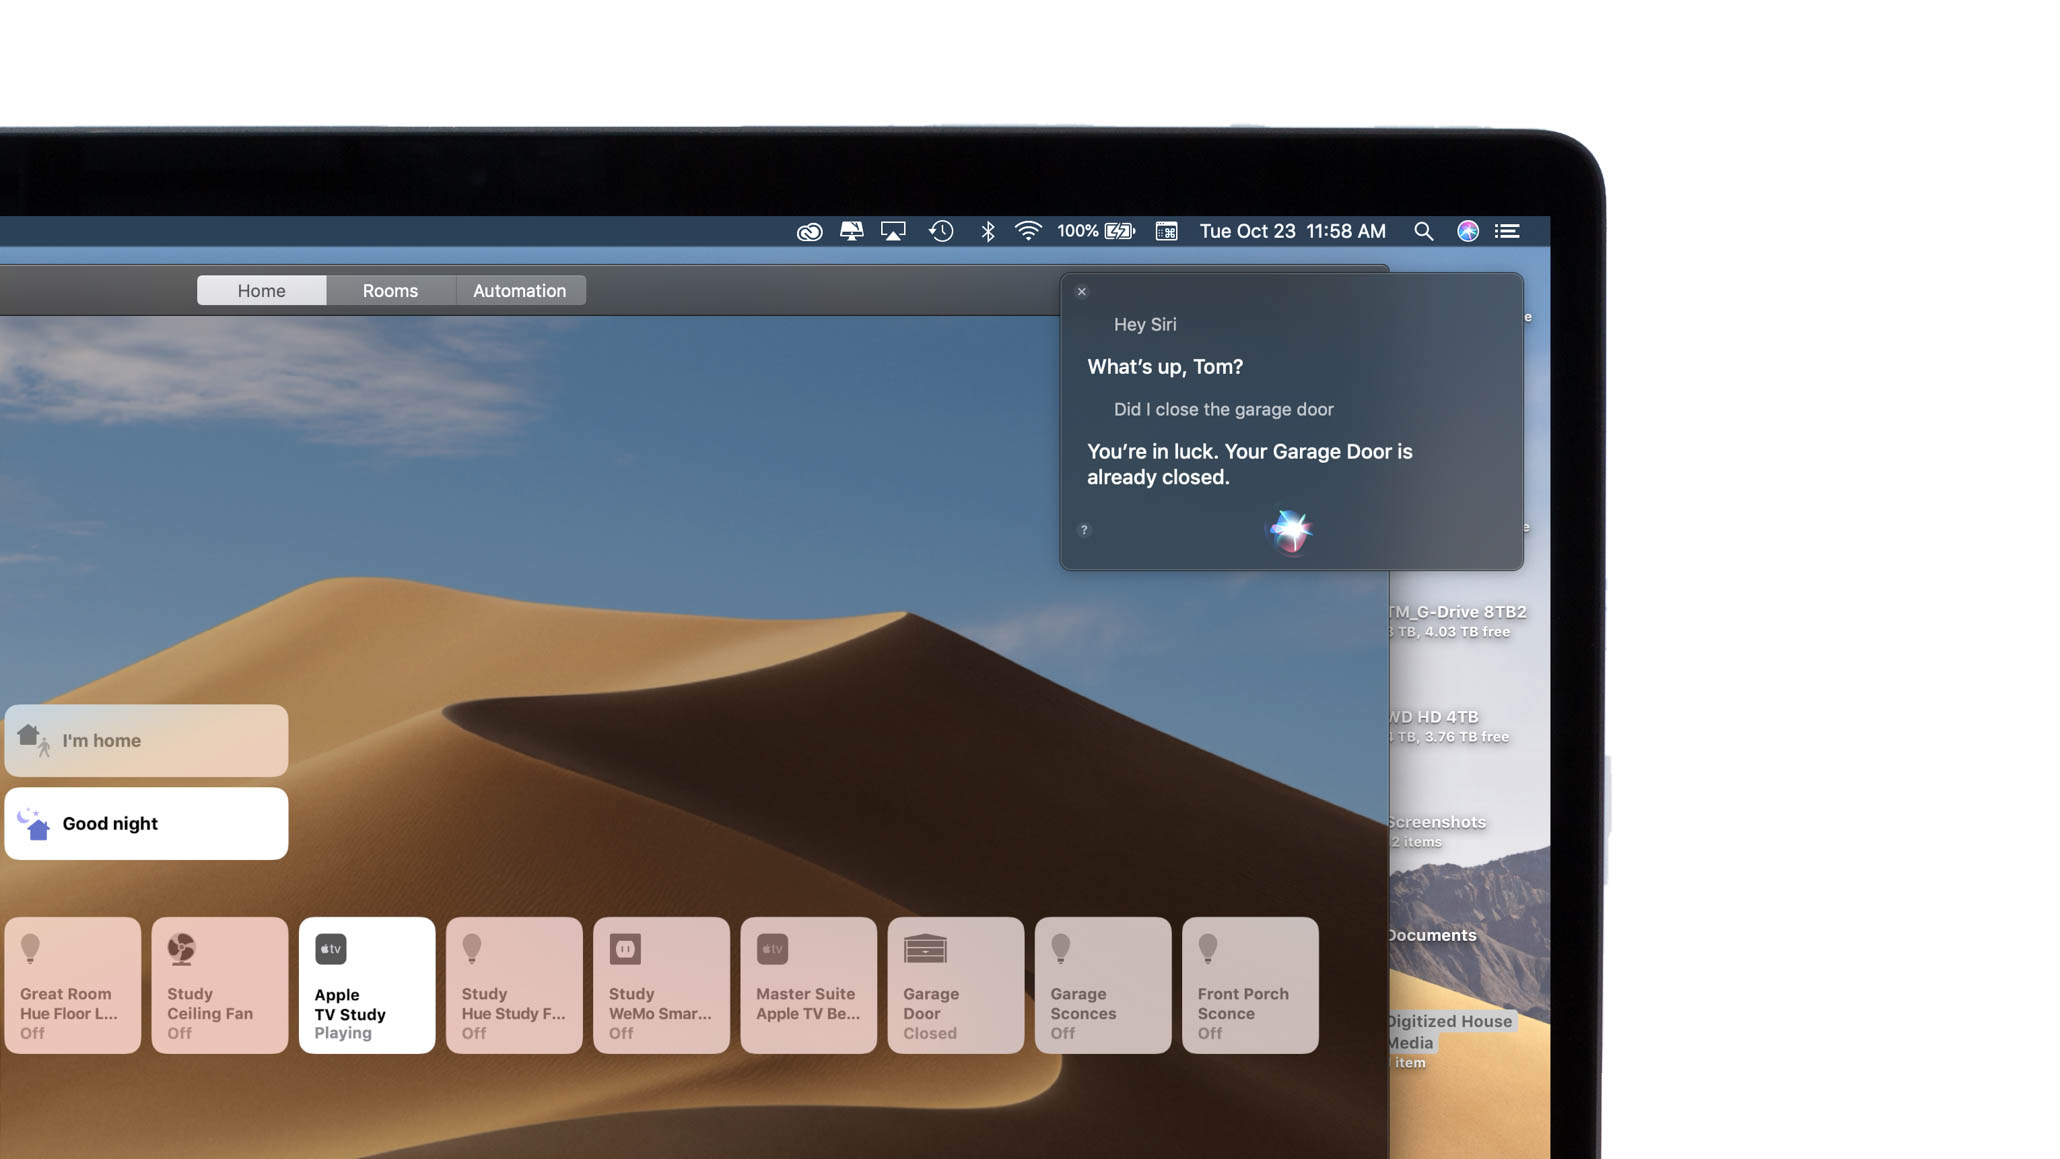 Voice activation is all the rage in the connected home, and the Siri assistant on Mojave gains full control of all HomeKit accessories. Image: Digitized House Media.